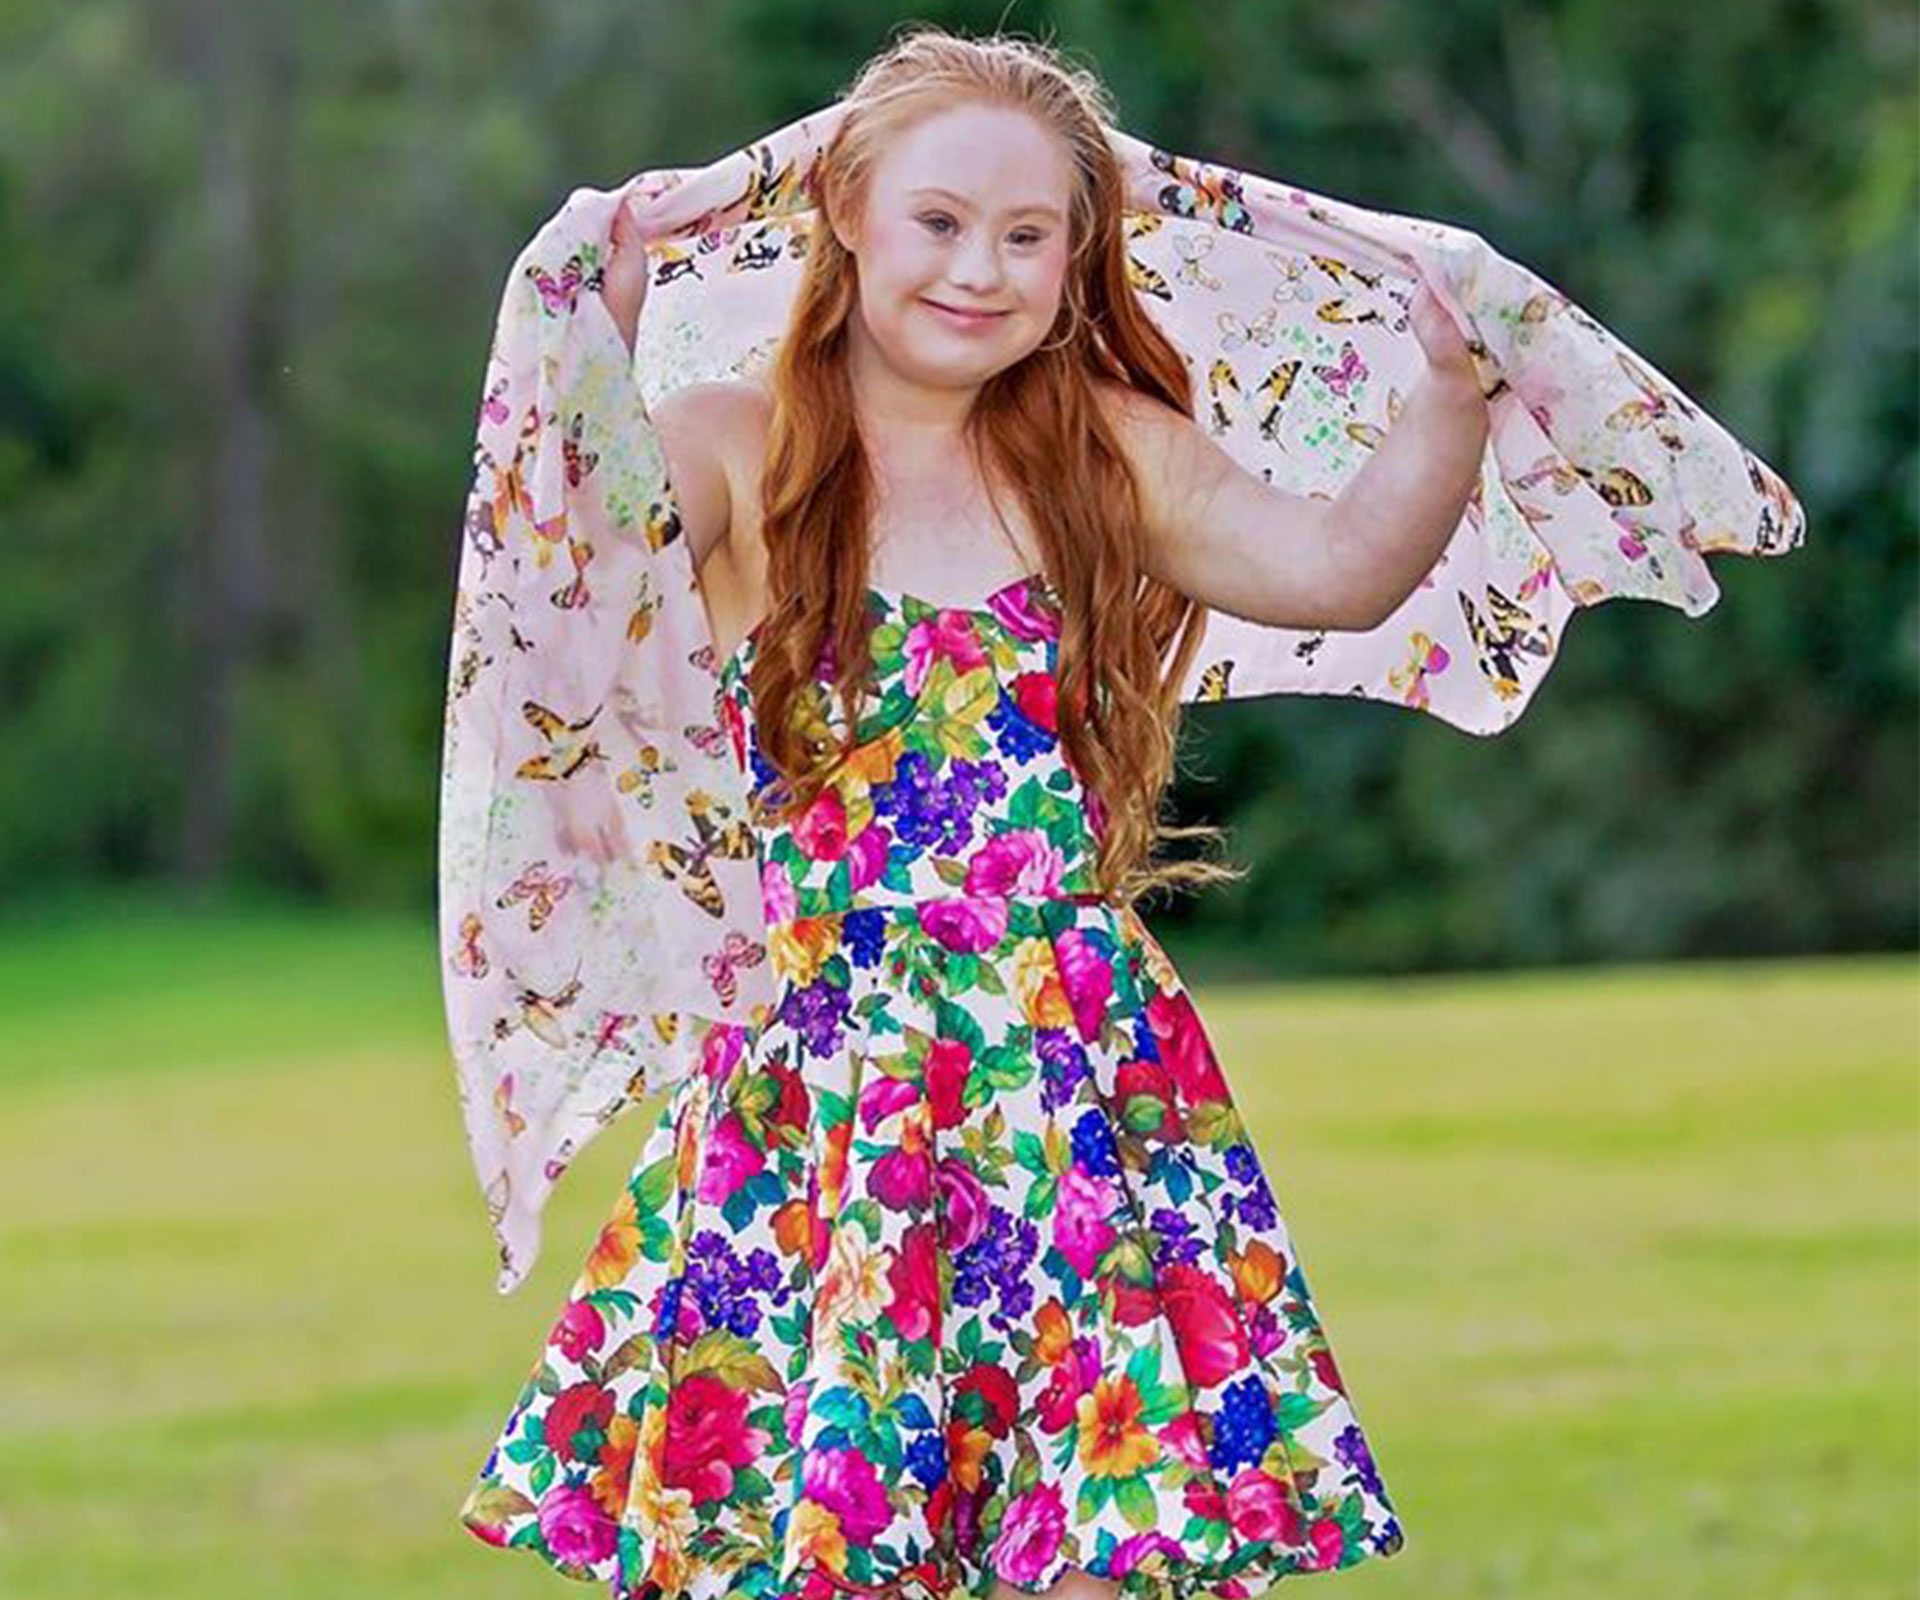 Gorgeous Australian model Madeline Stuart, who has down syndrome, is set to walk to runway at New York Fashion Week.